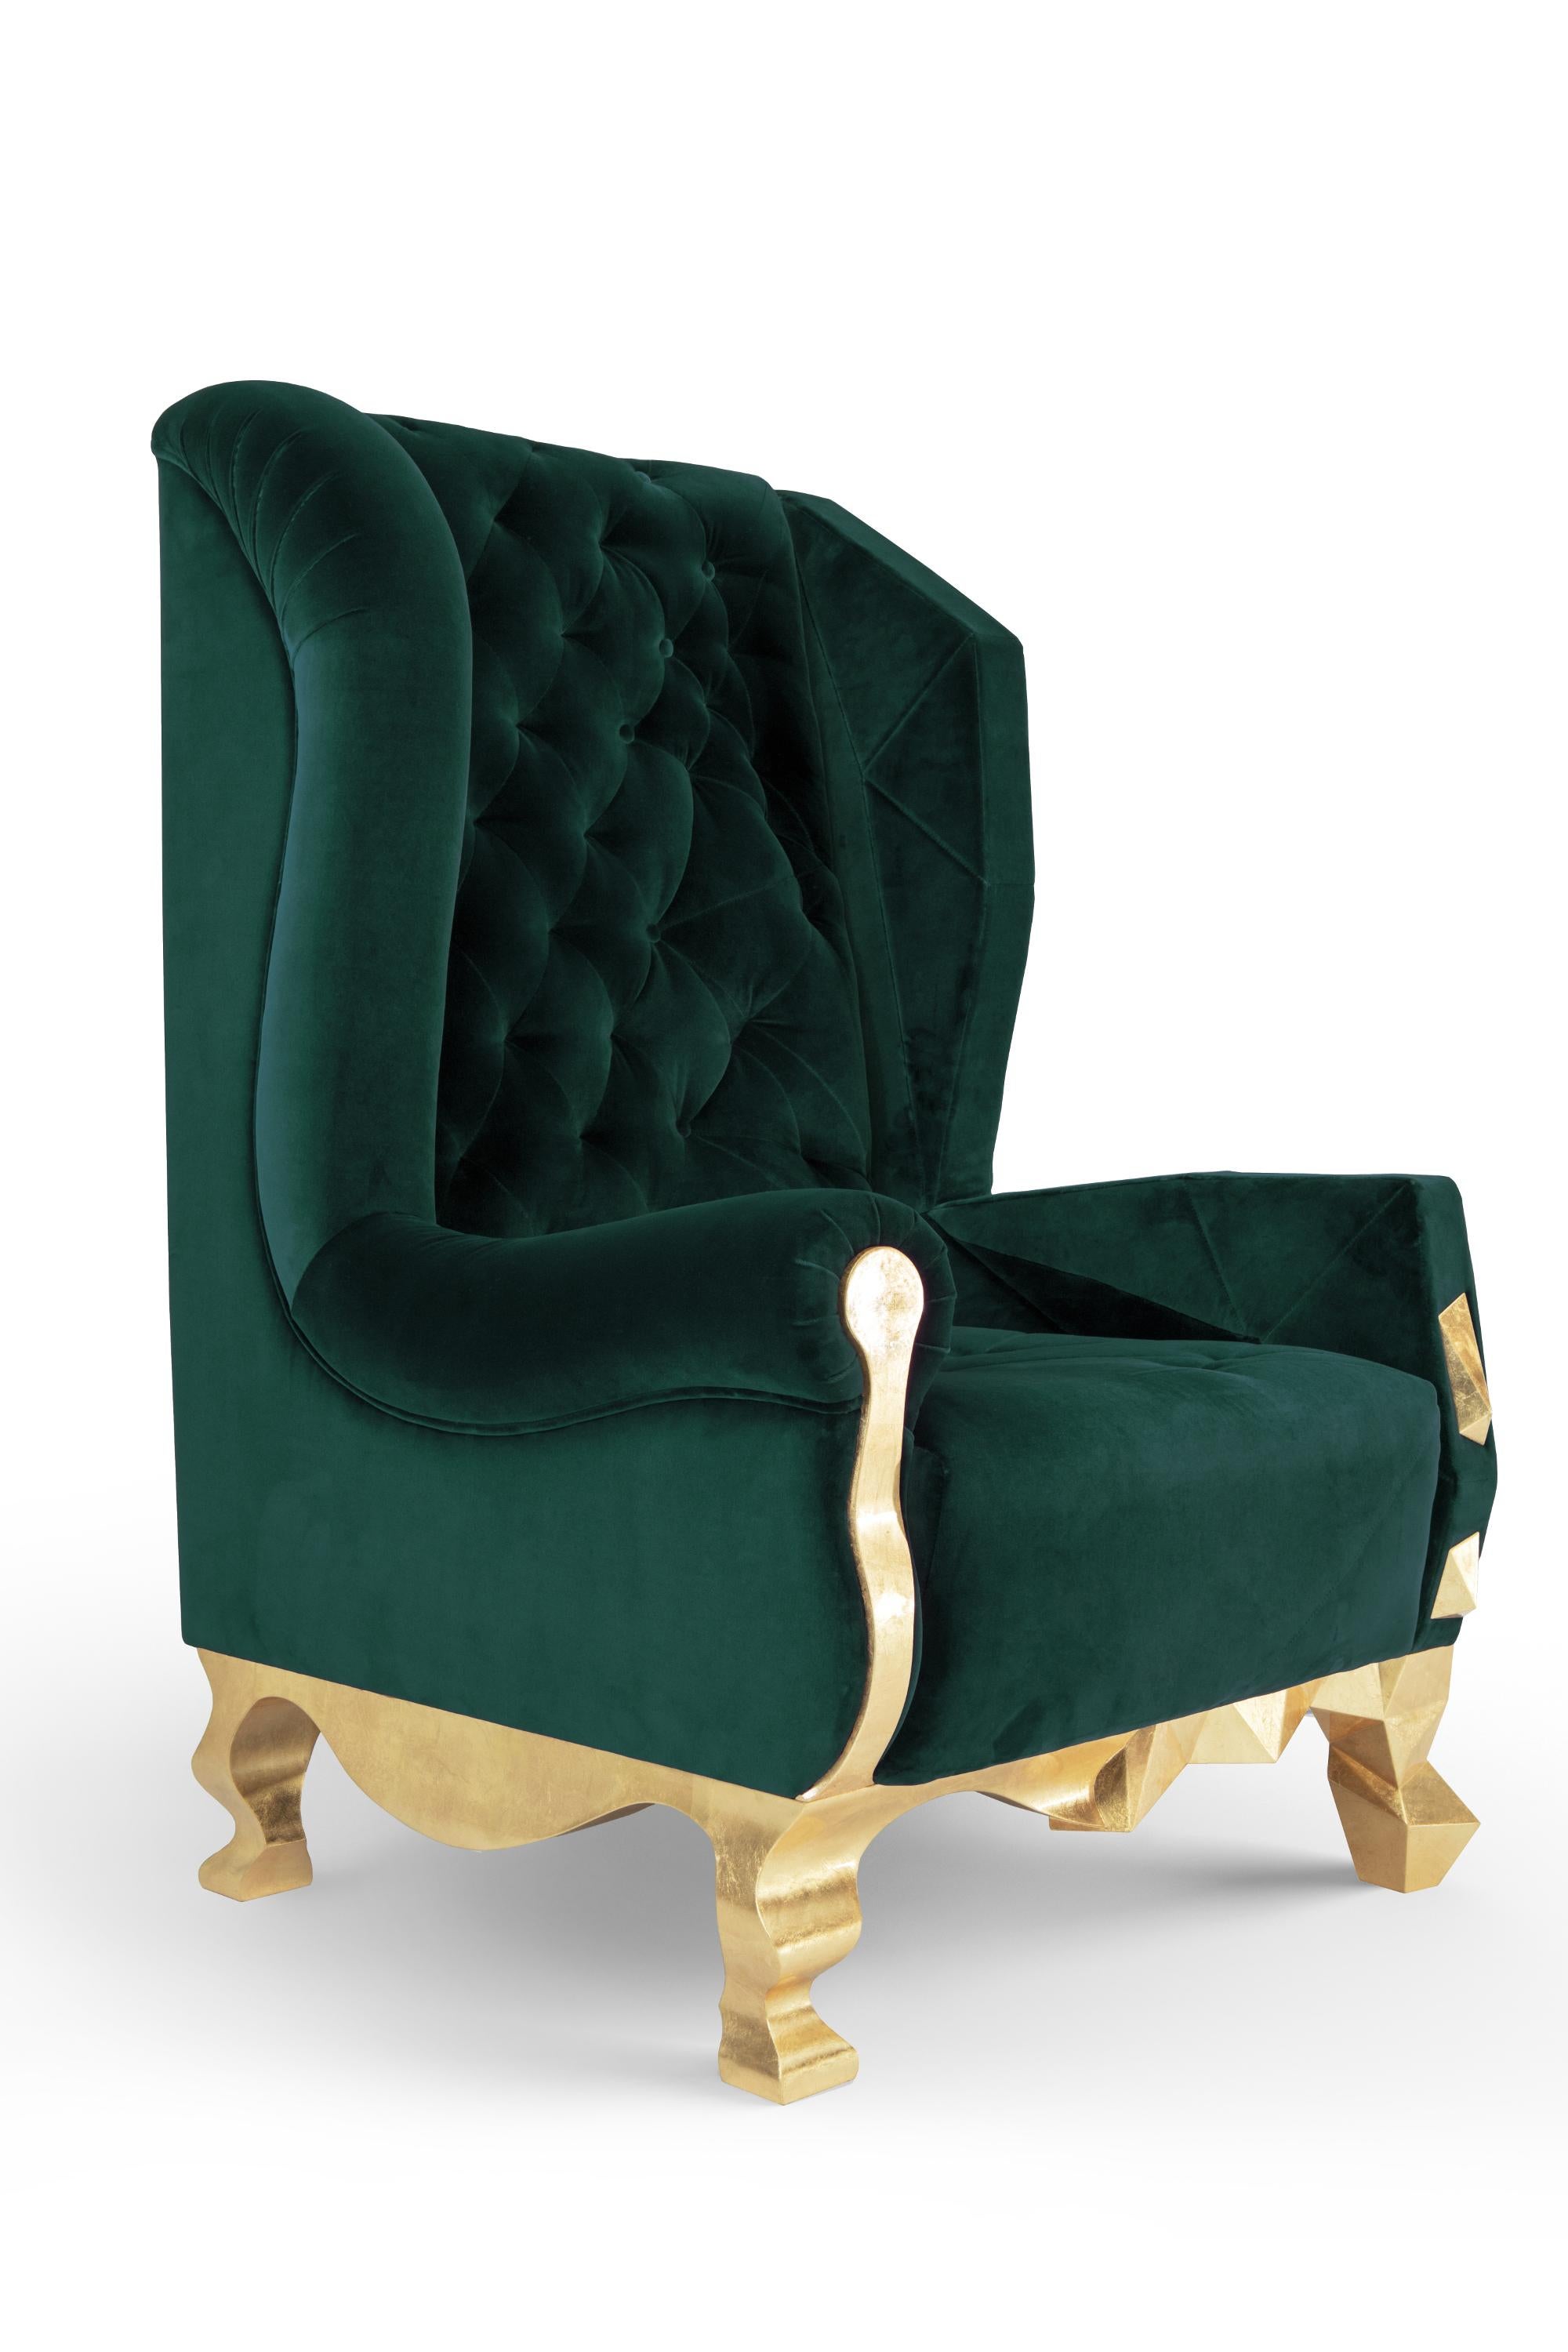 Deep green Rockchair by Royal Stranger
Dimensions: Width 98cm, height 135cm, depth 99cm
Different upholstery colors and finishes are available. Brass, copper or stainless steel in polished or brushed finish.
Materials: velvet on the top of the gold